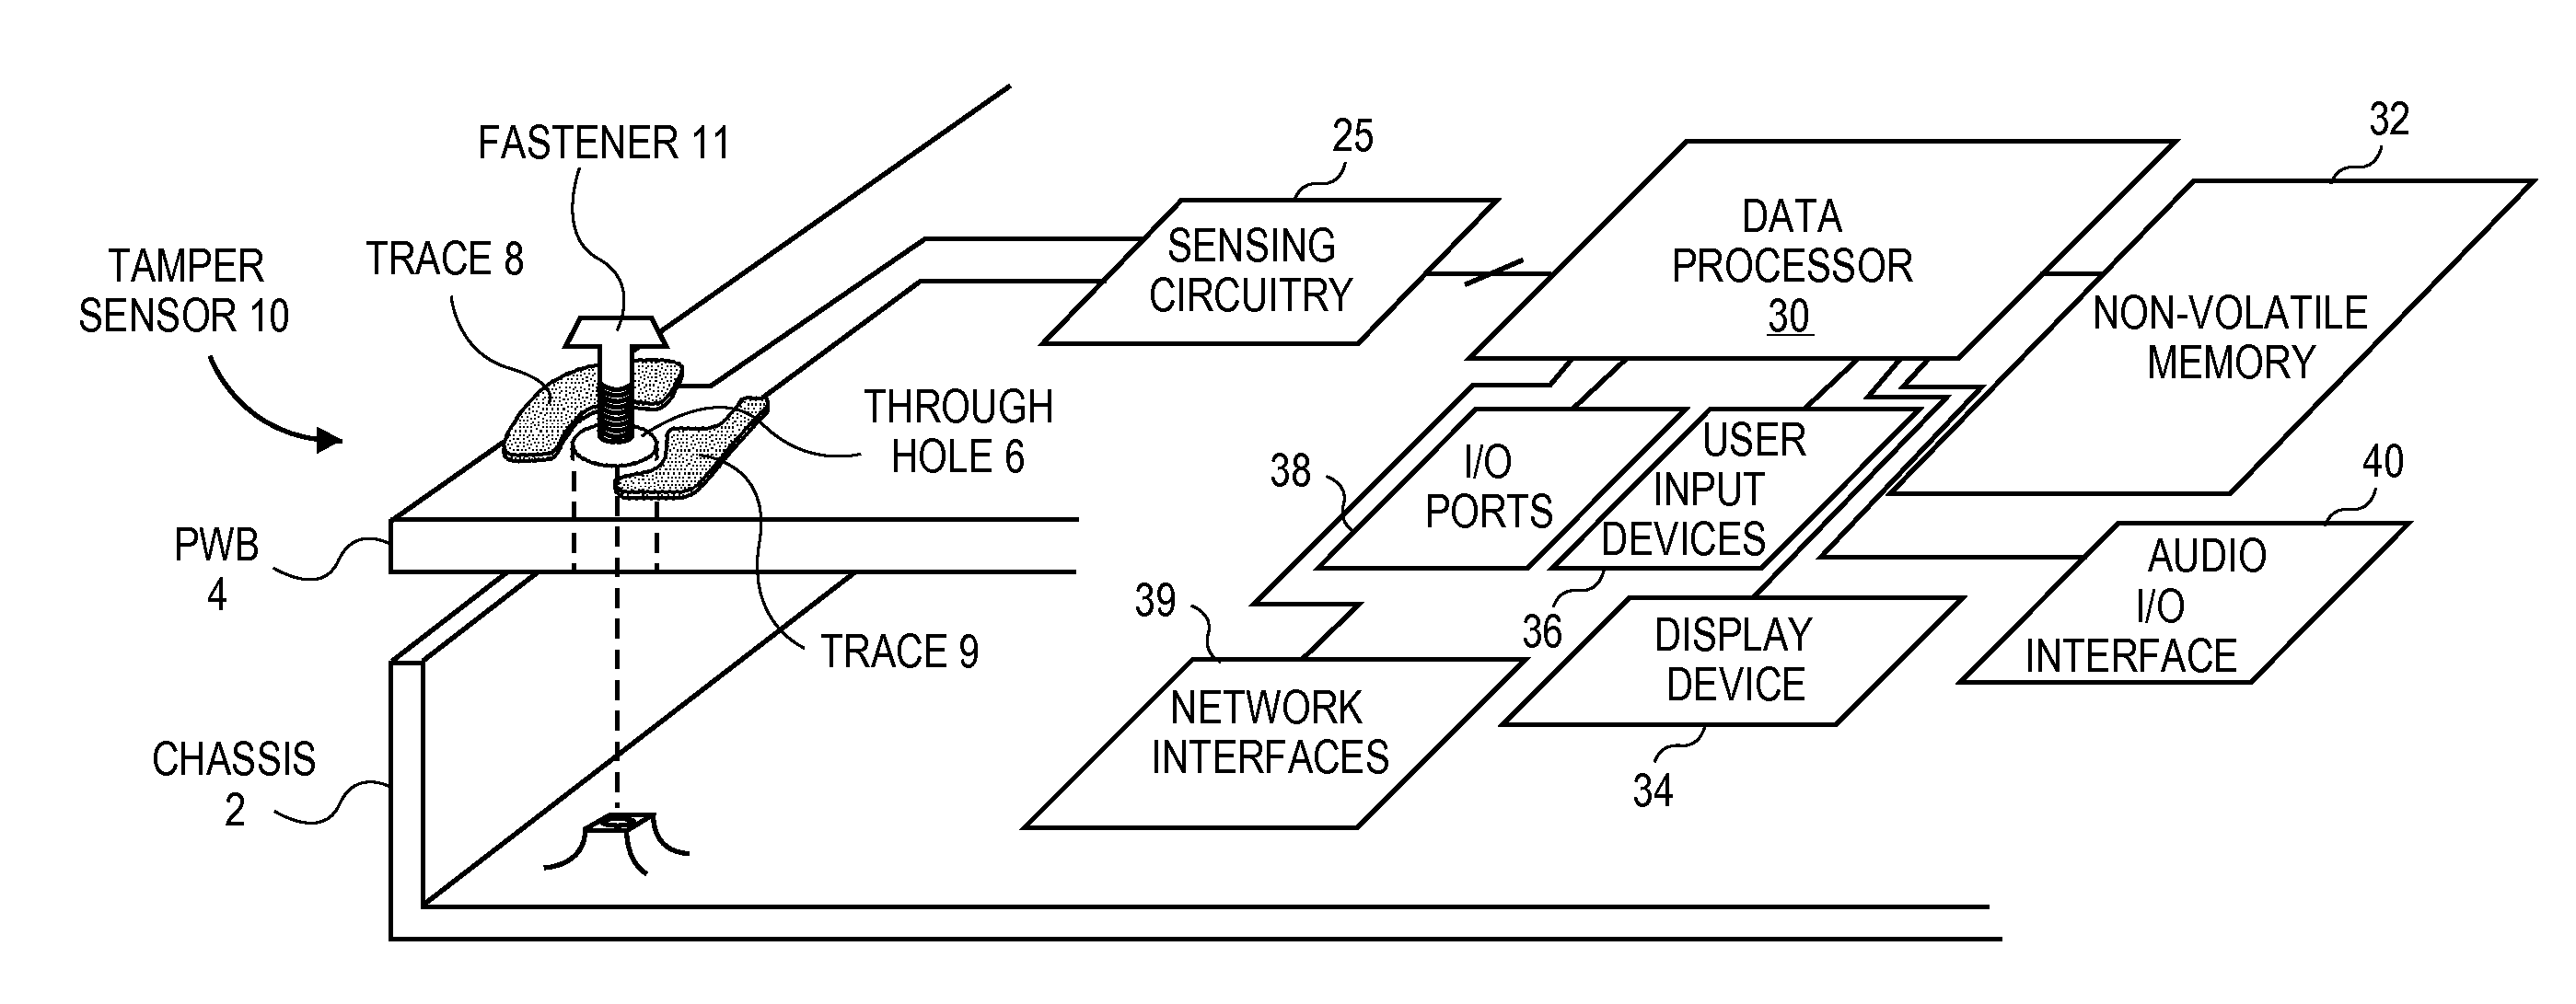 Mechanisms for detecting tampering of an electronic device